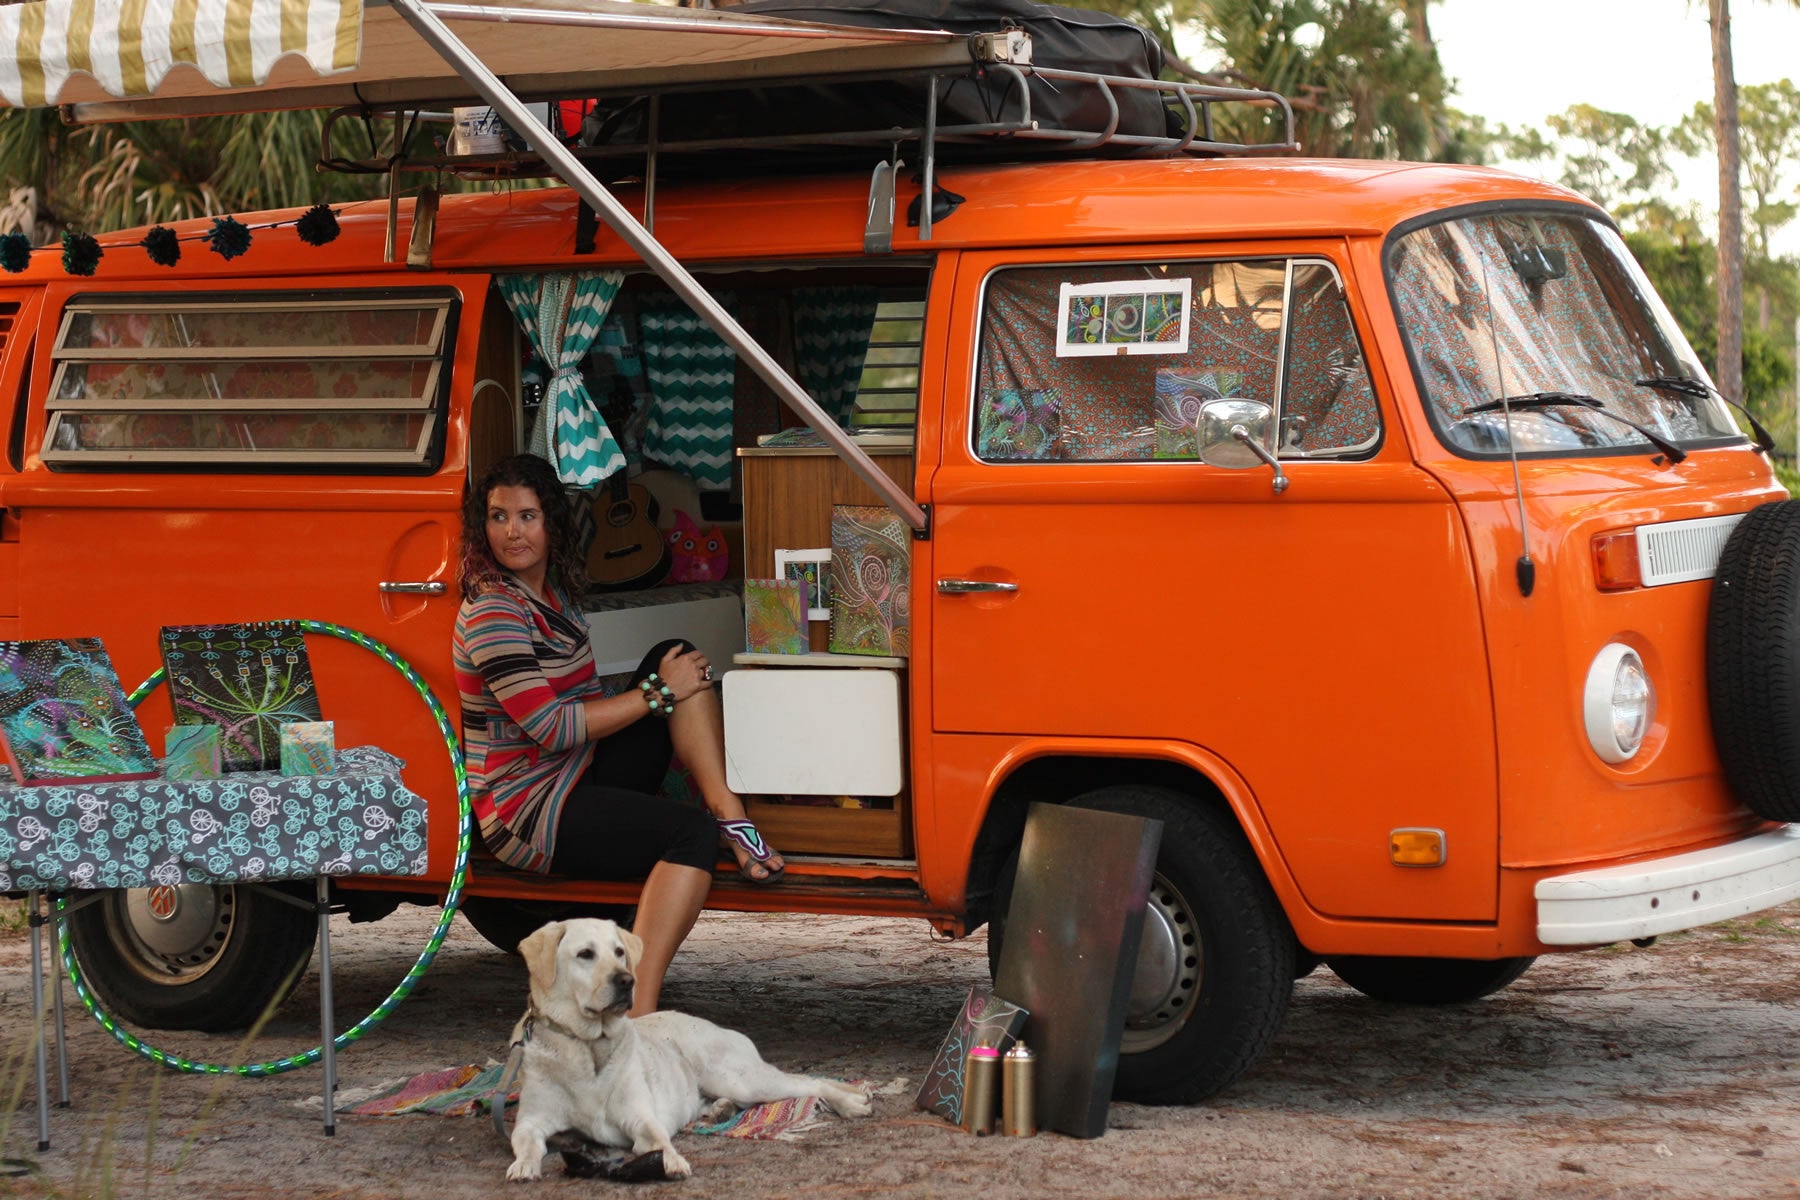 Mallory and Baylor hang out in her orange camper van.